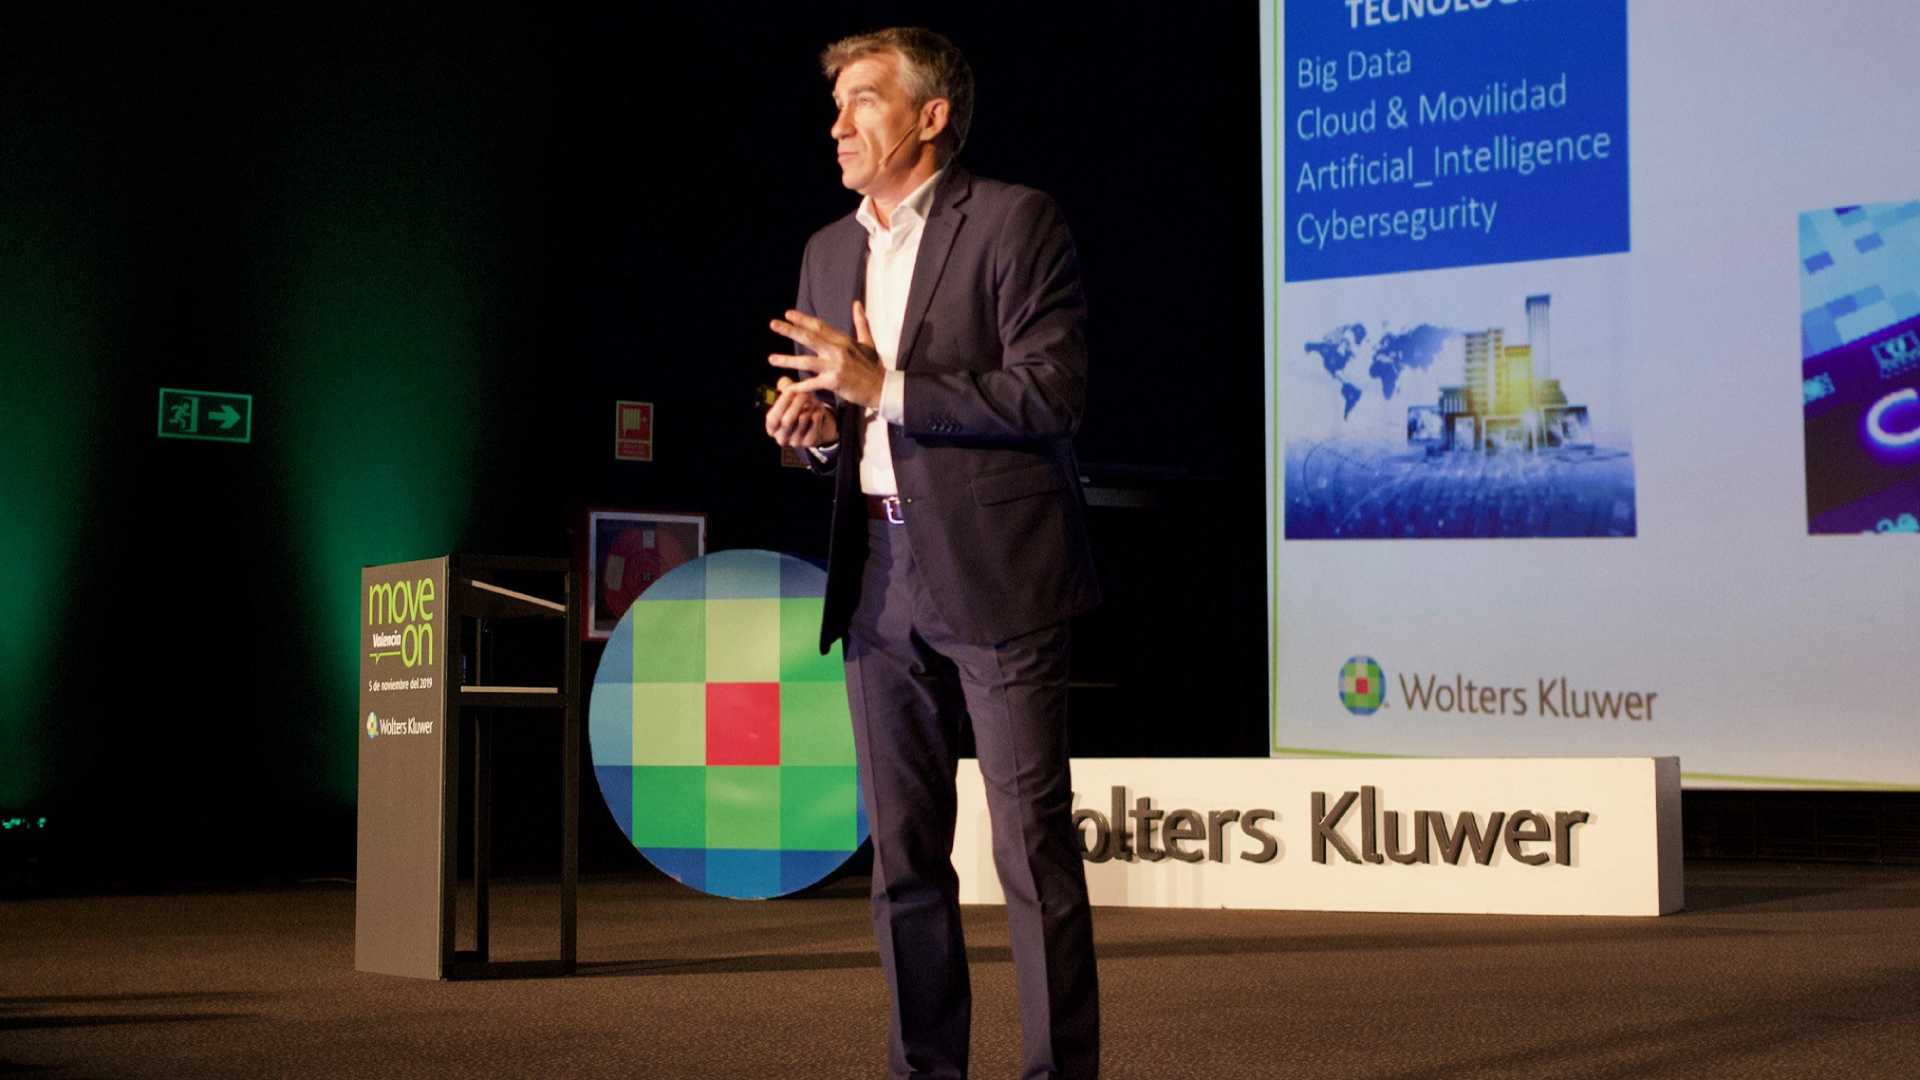 Wolters Kluwer Move On Valencia